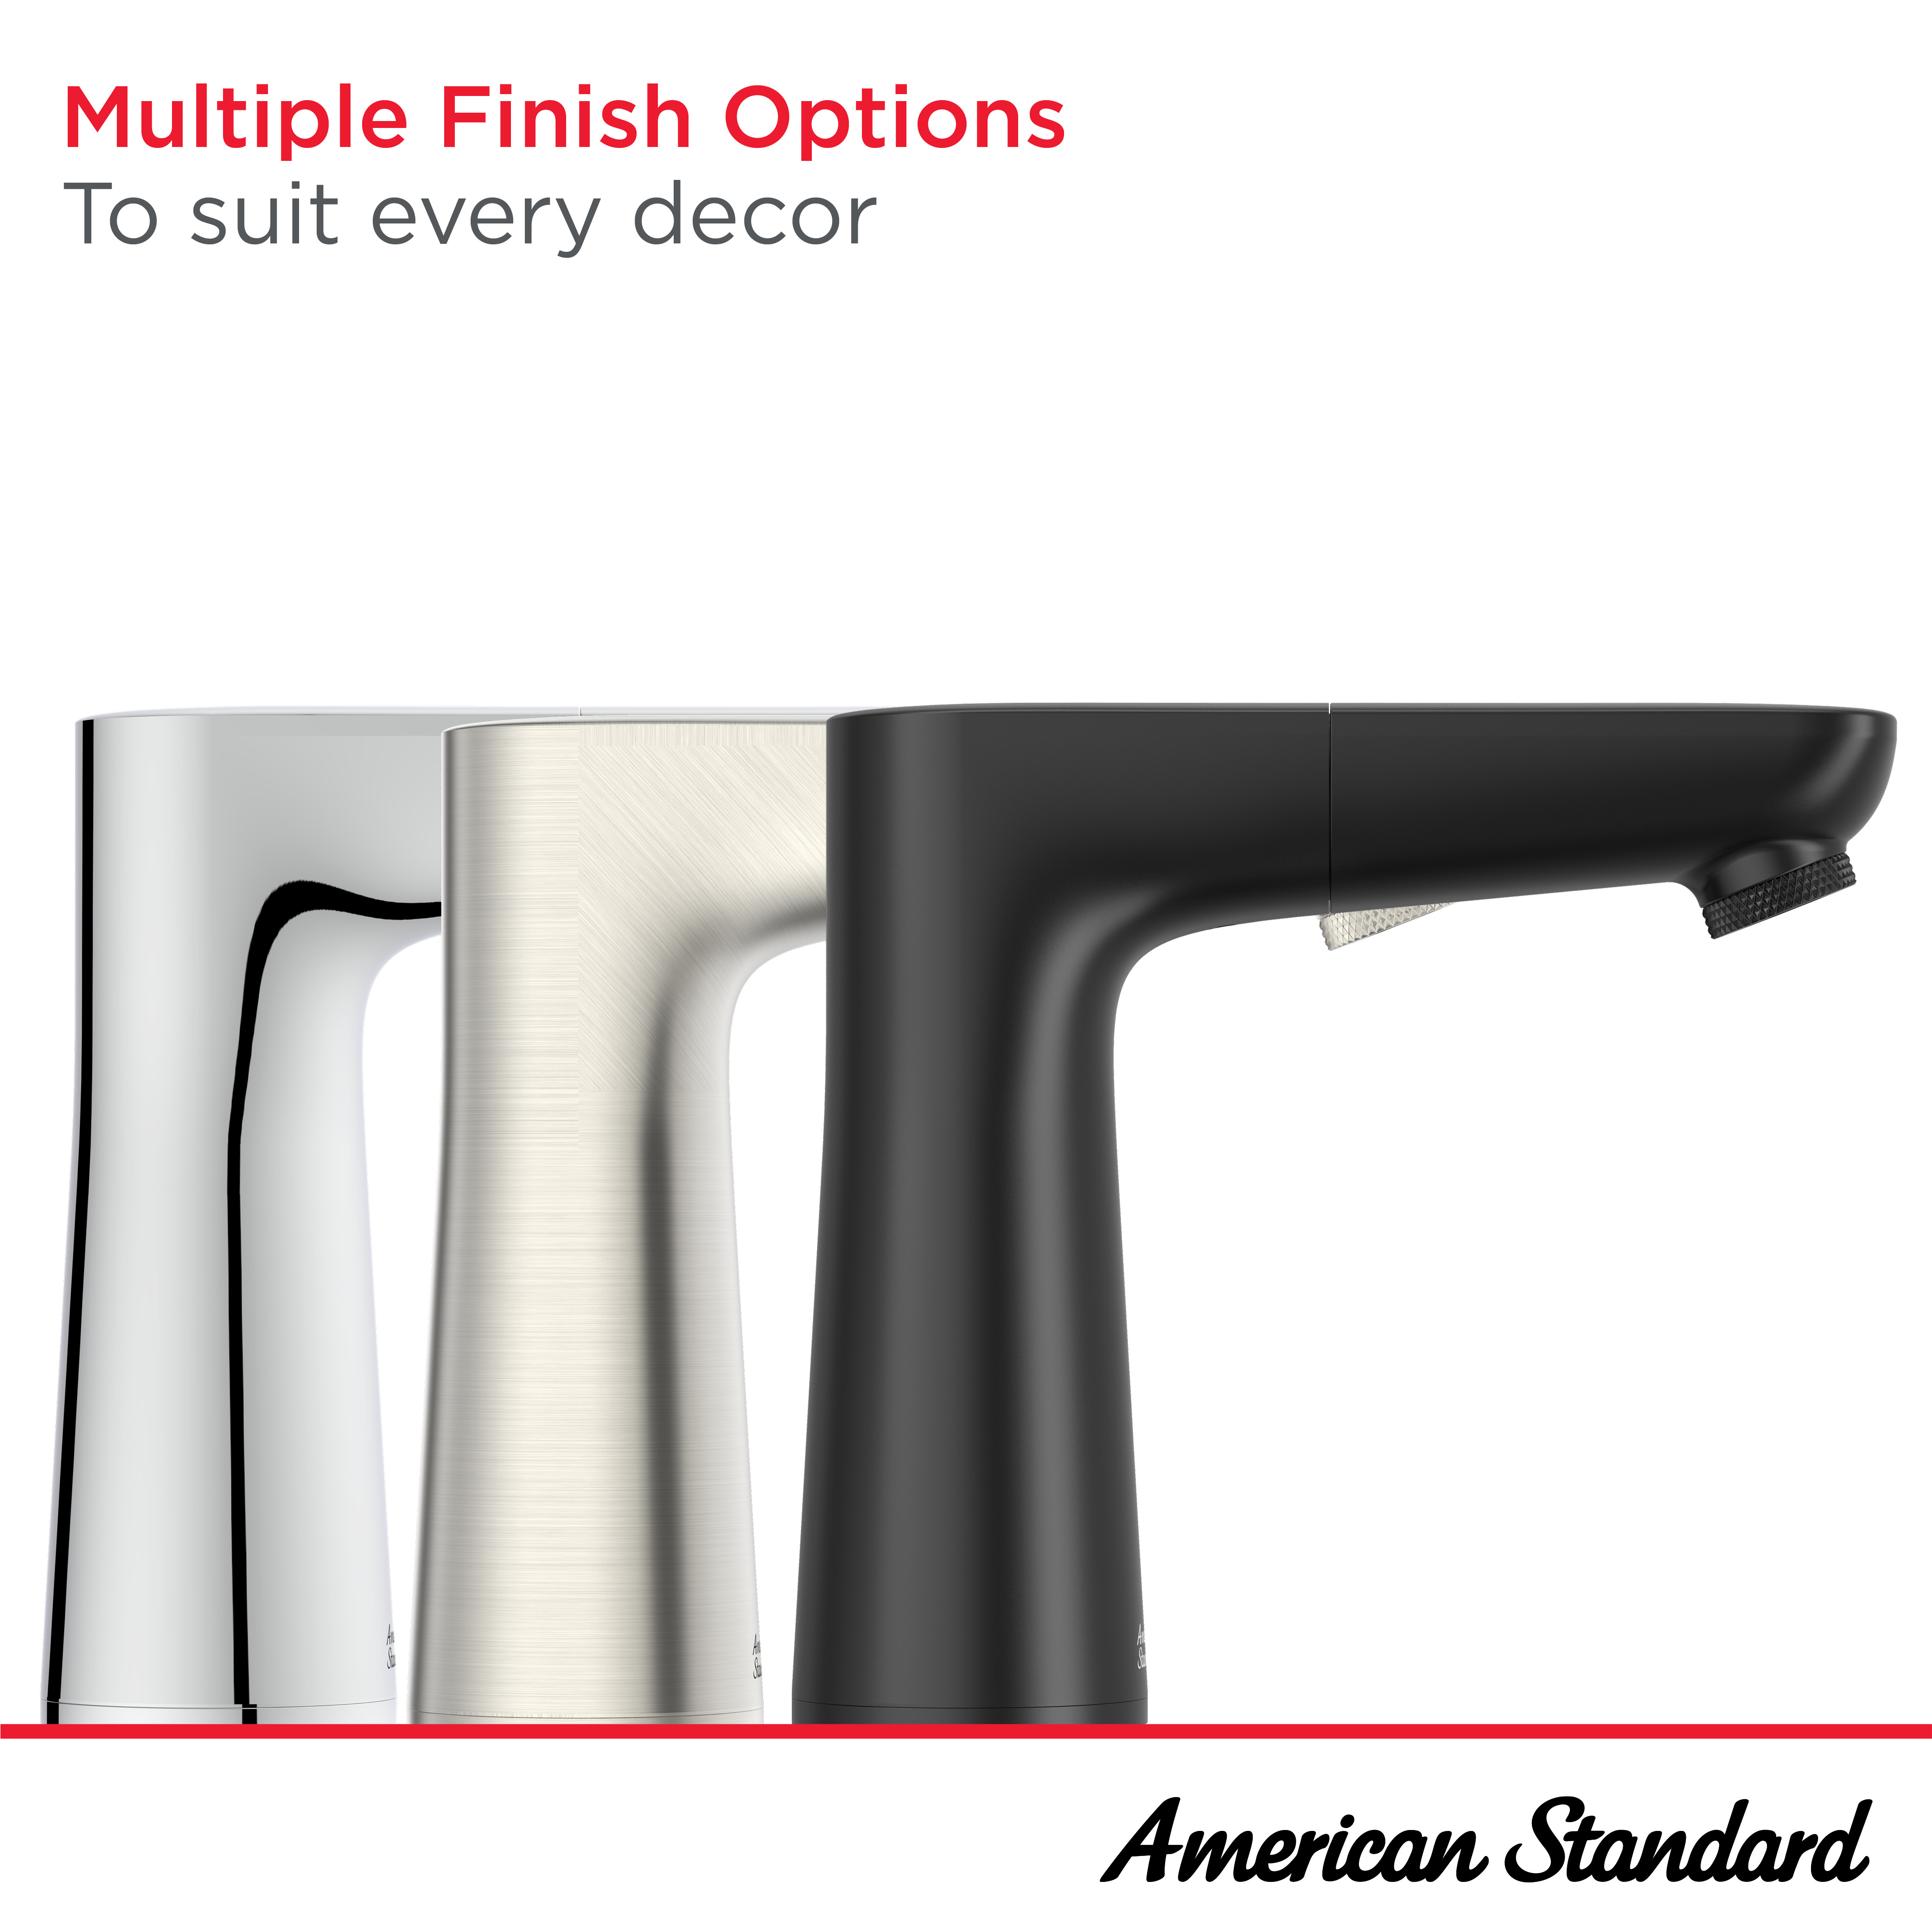 Aspirations™ Single-Handle Pull-Out Bathroom Faucet 1.2 gpm/4.5 L/min With Lever Handle